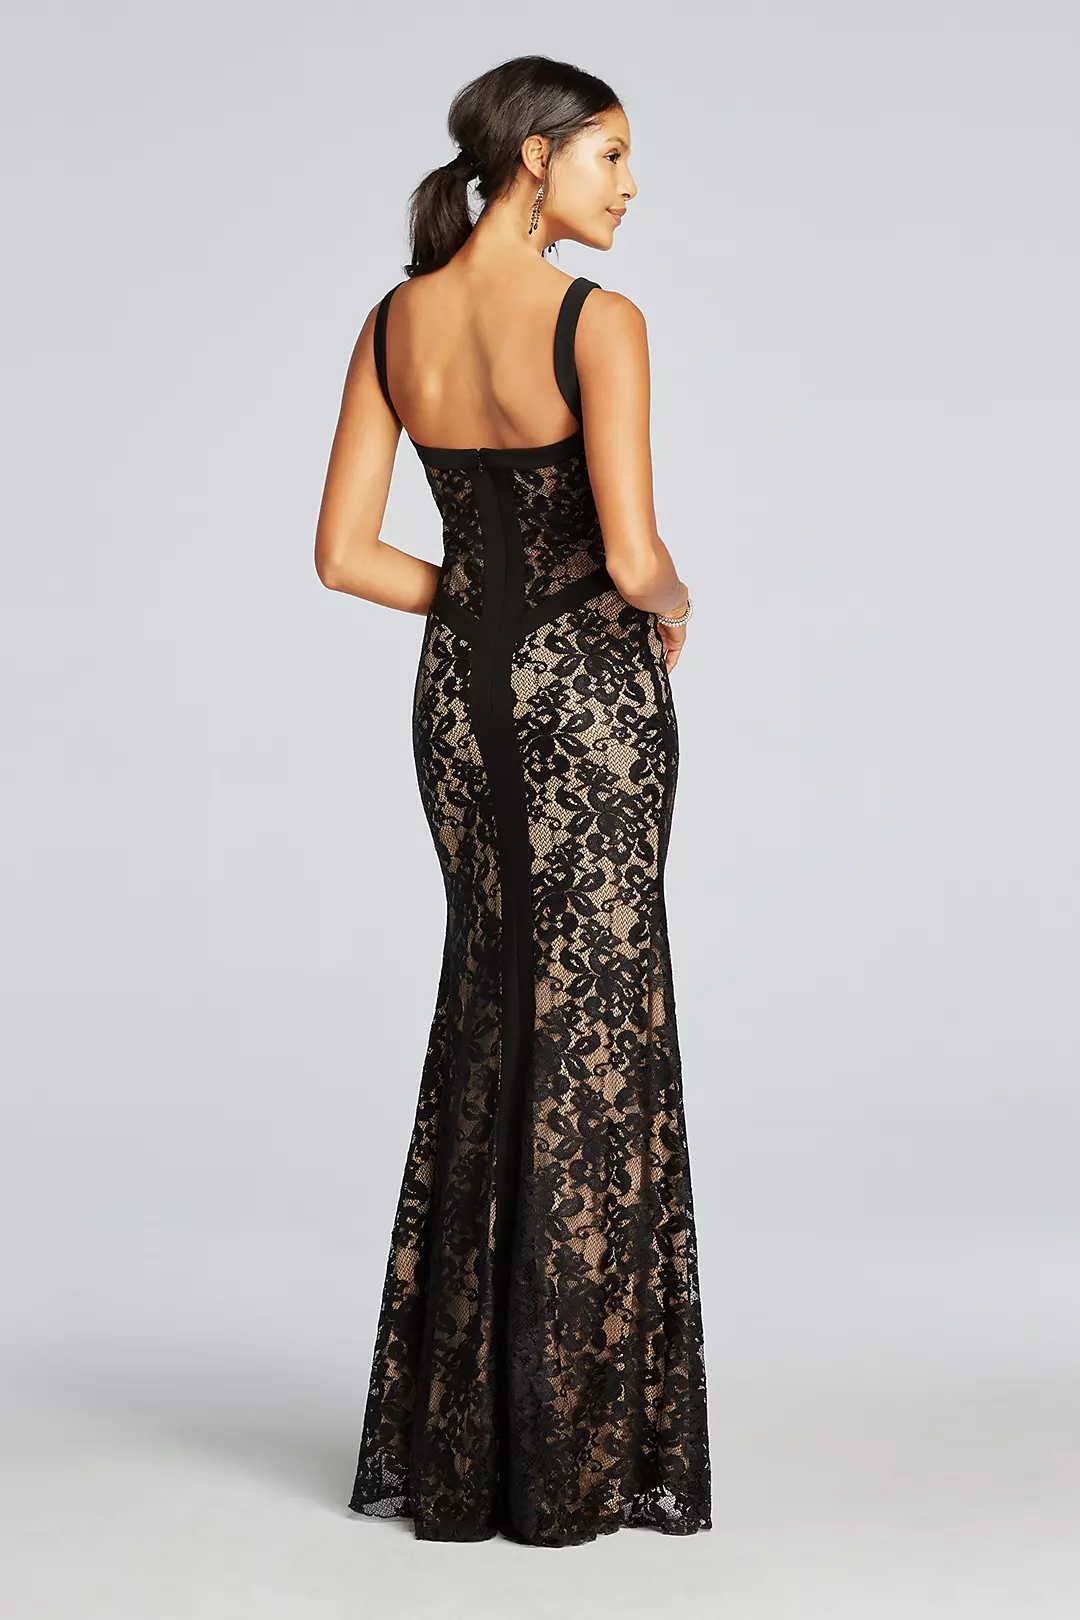 Long Sleeveless All Over Illusion Lace Dress   Image 2